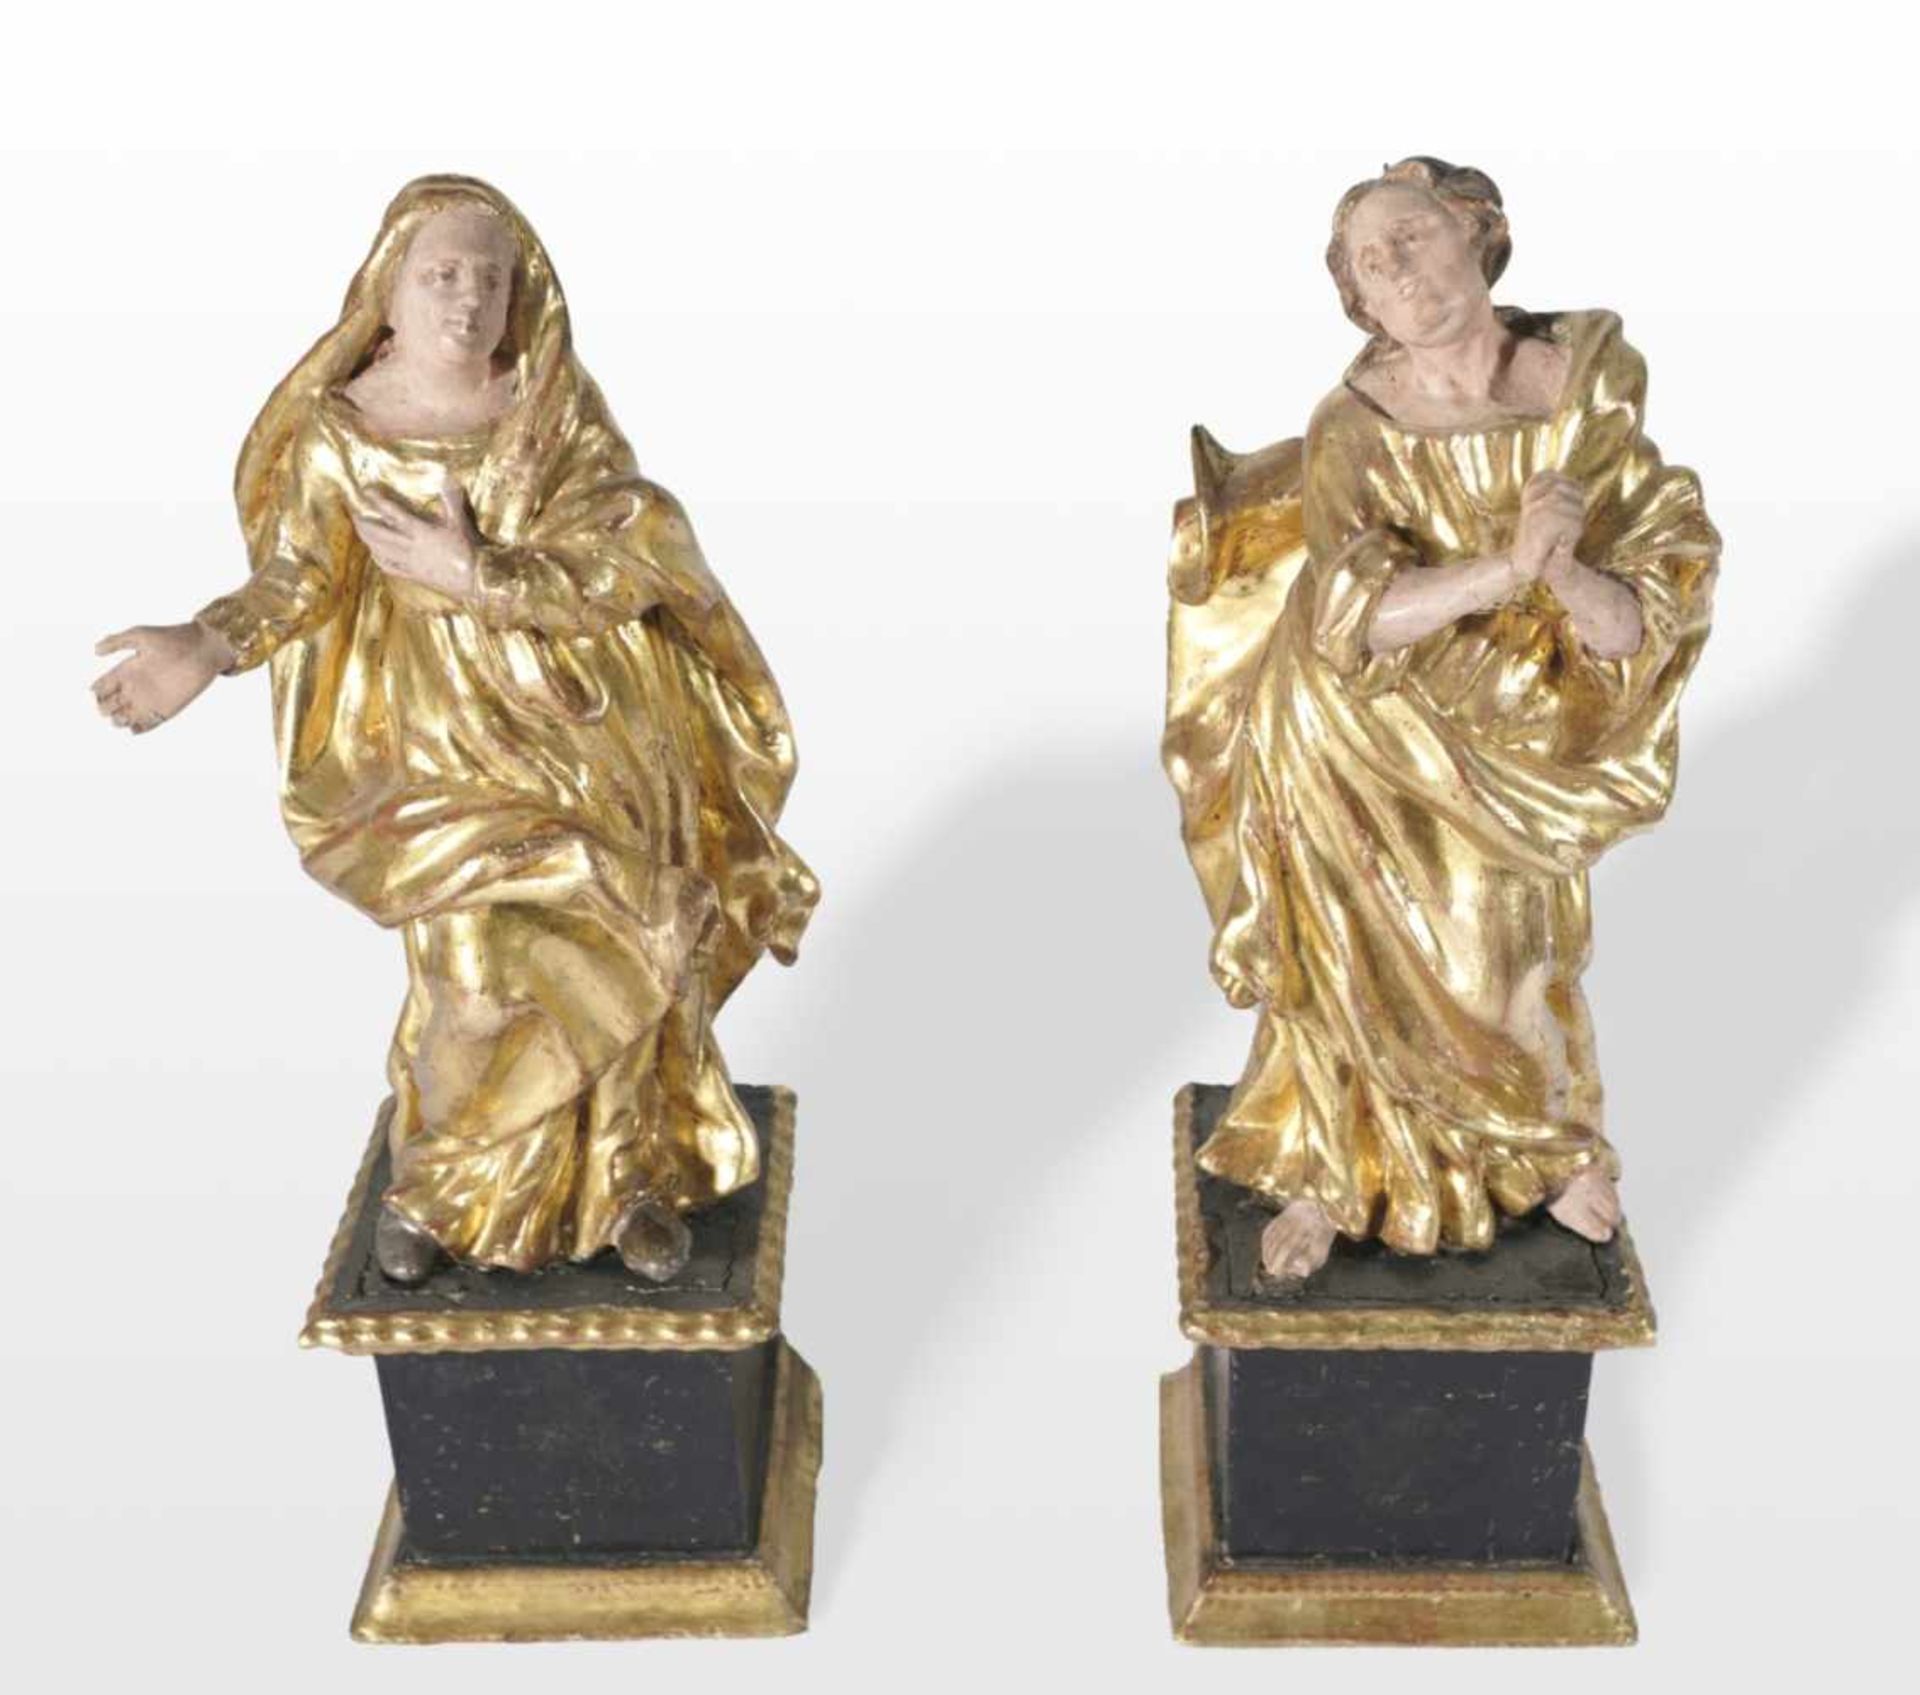 St. Mary and St. John as Assistant Figures, Baroque, wood carvings, probably end of 18th